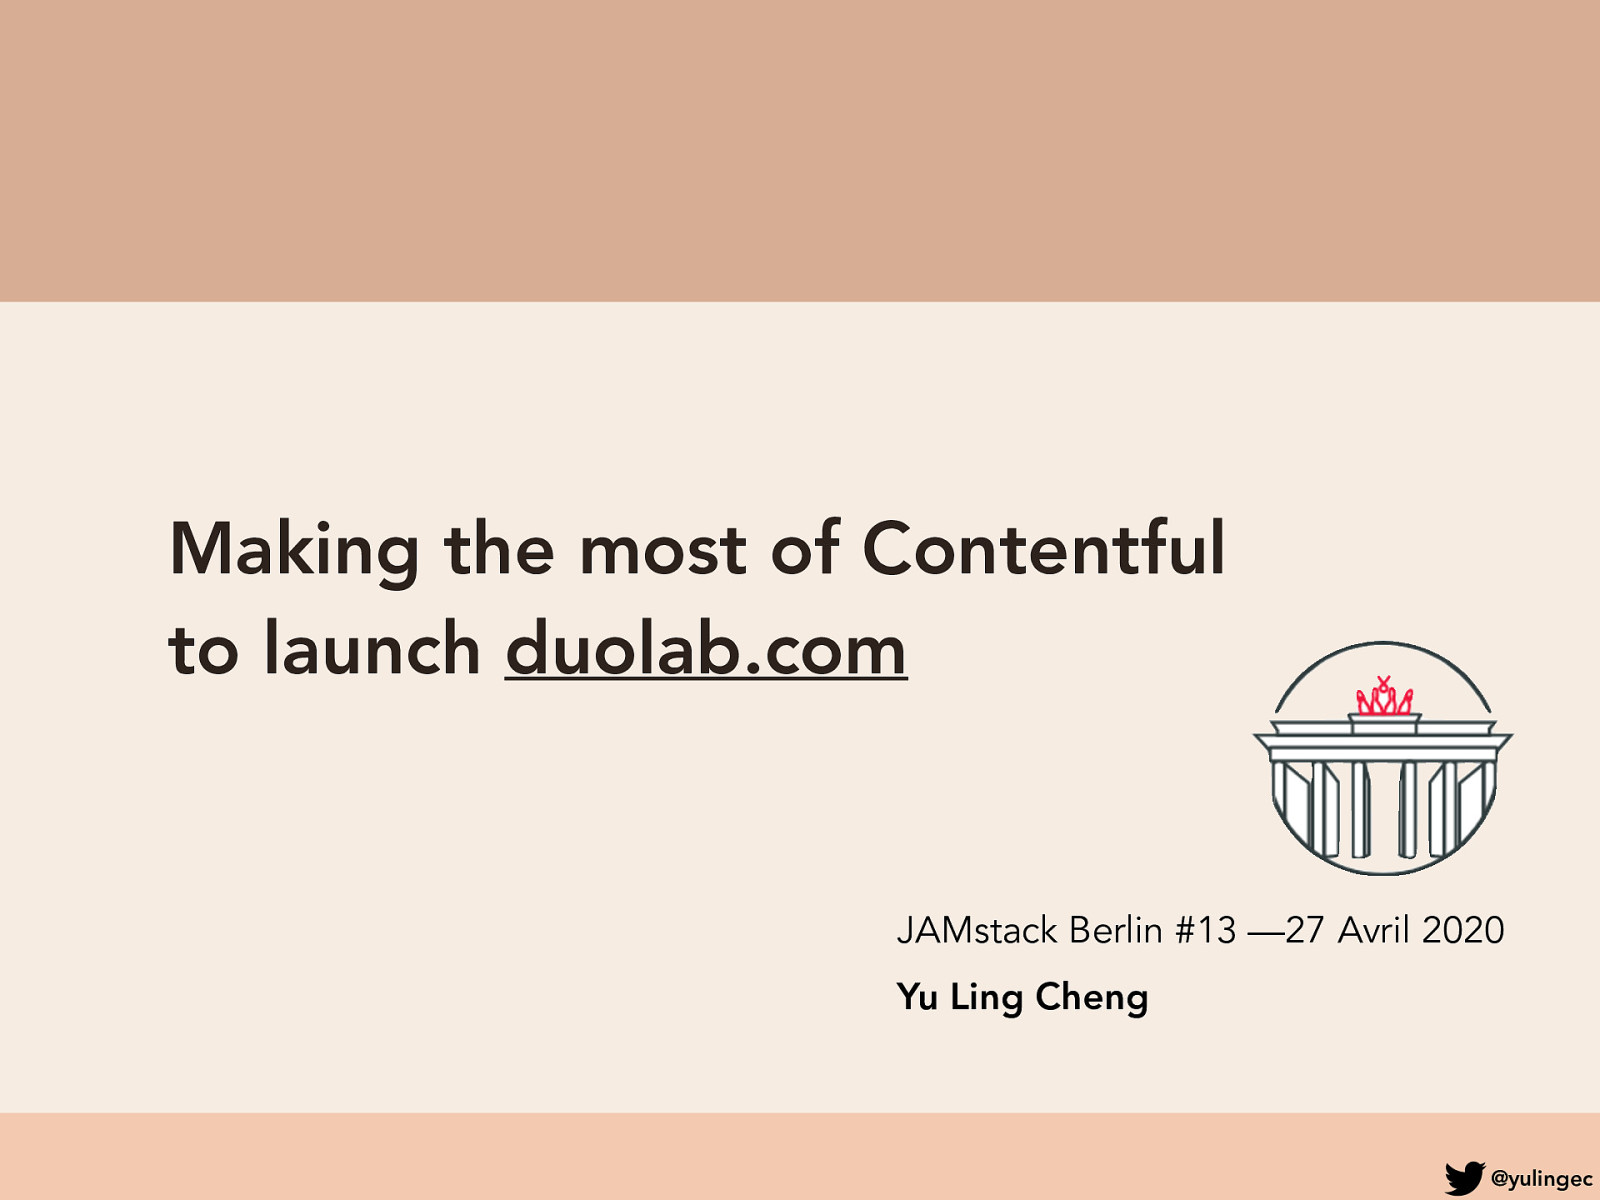 Making the most of Contentful to launch Duolab.com